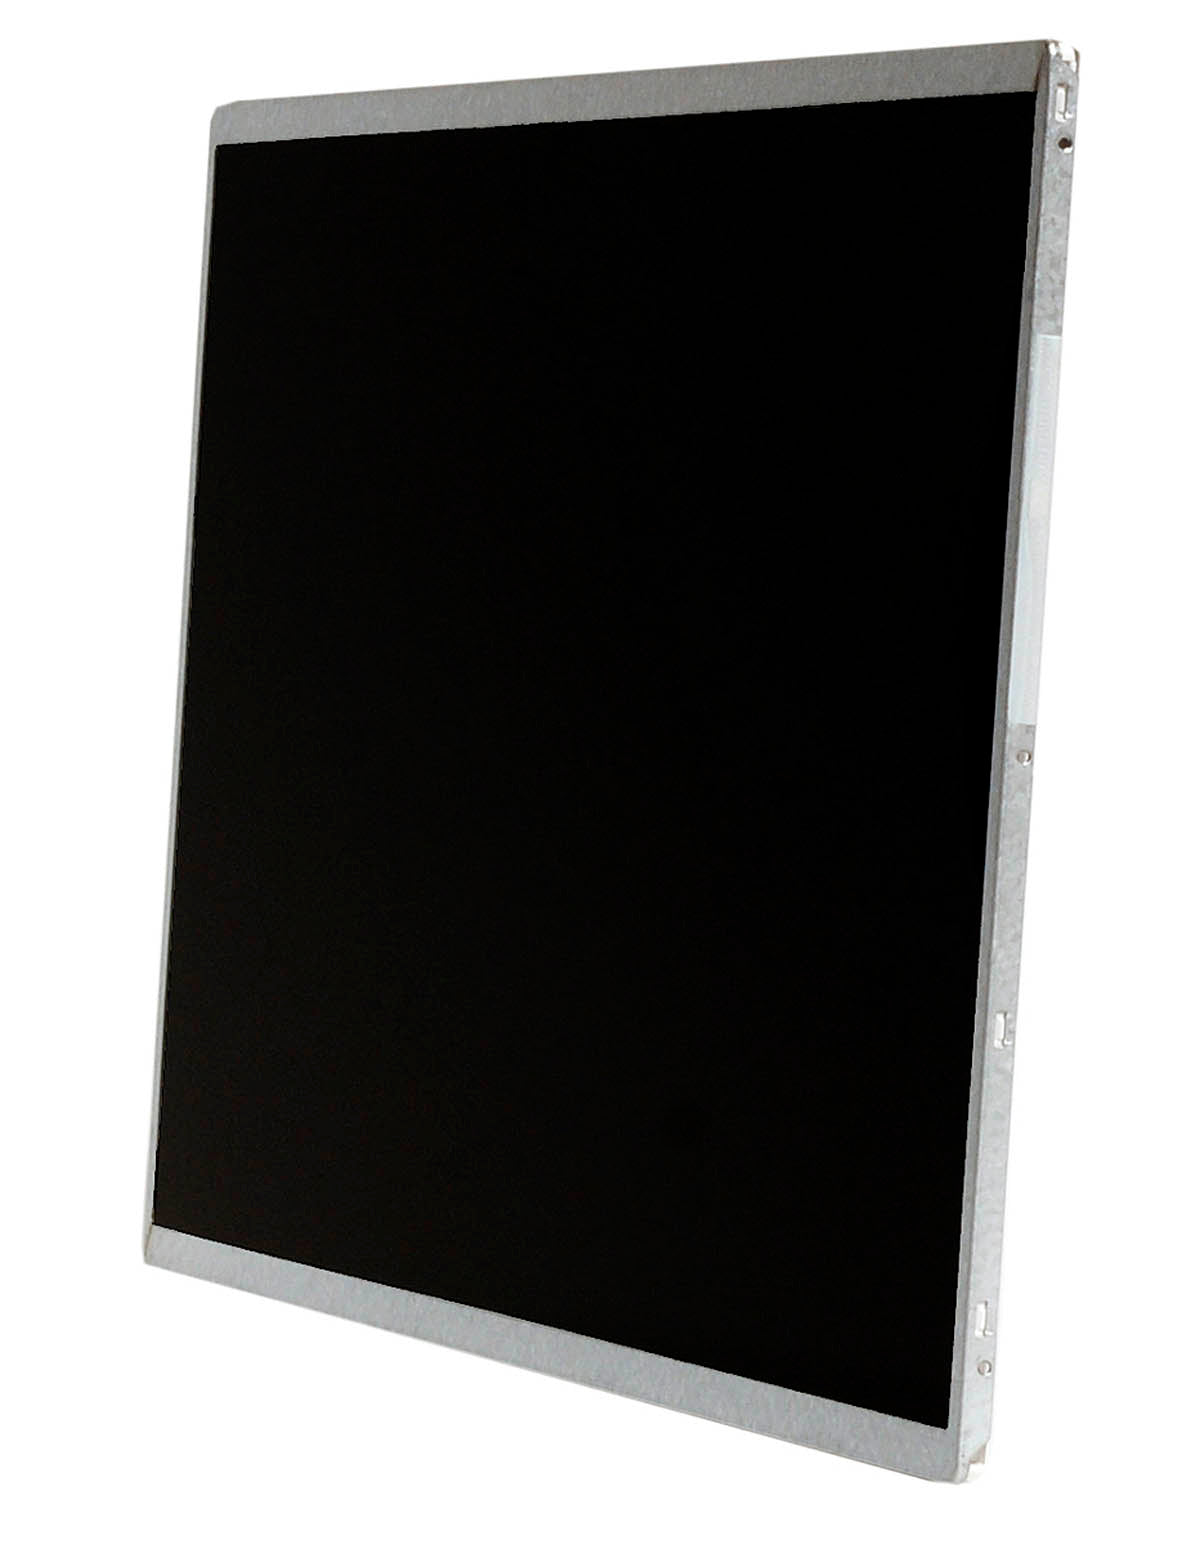 Replacement Screen For LTN140AT07-401 HD 1366x768 Glossy LCD LED Display